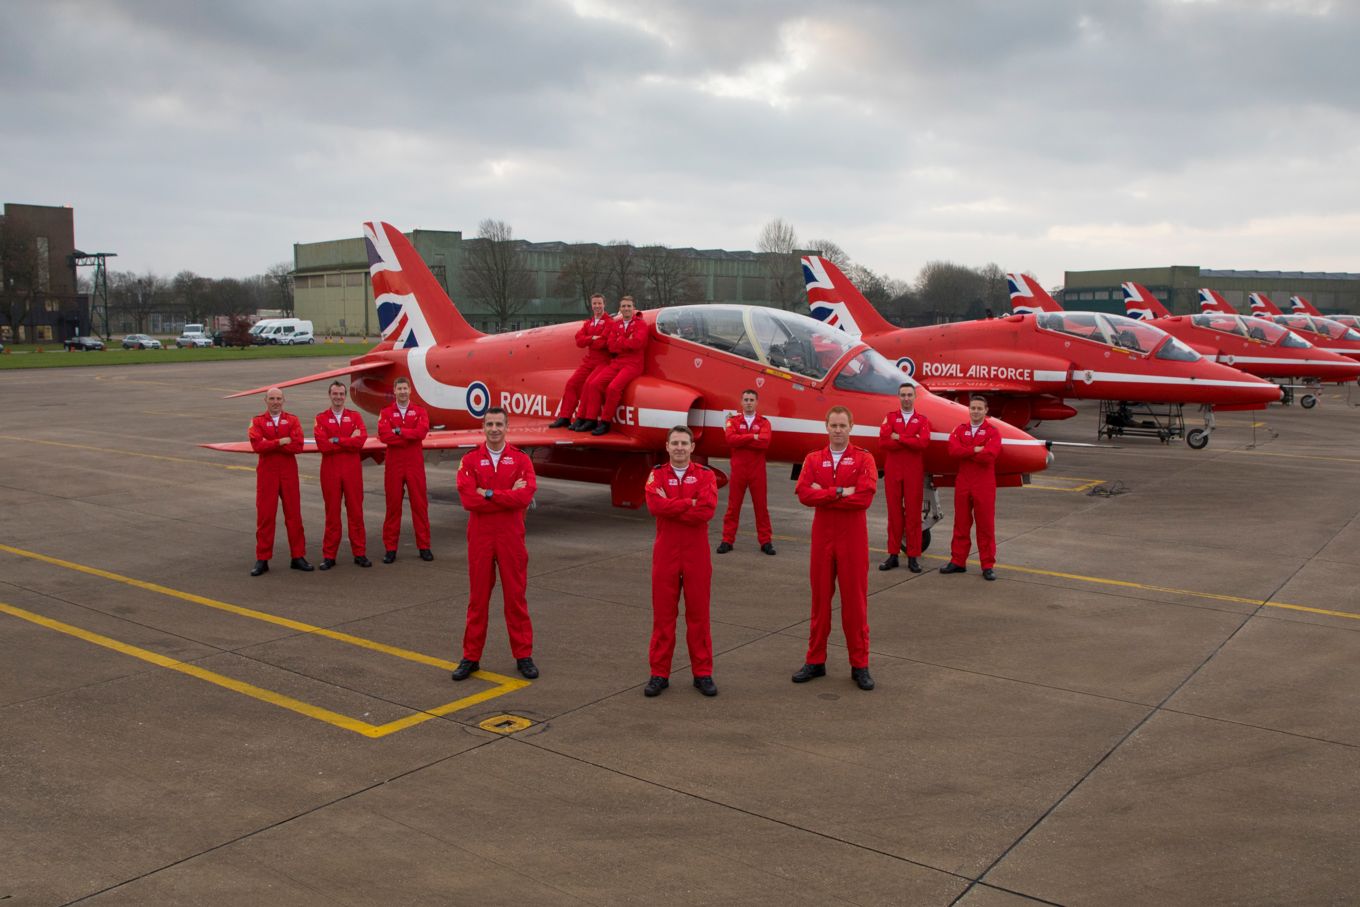 Reds 1-11: The Red Arrows pilots.